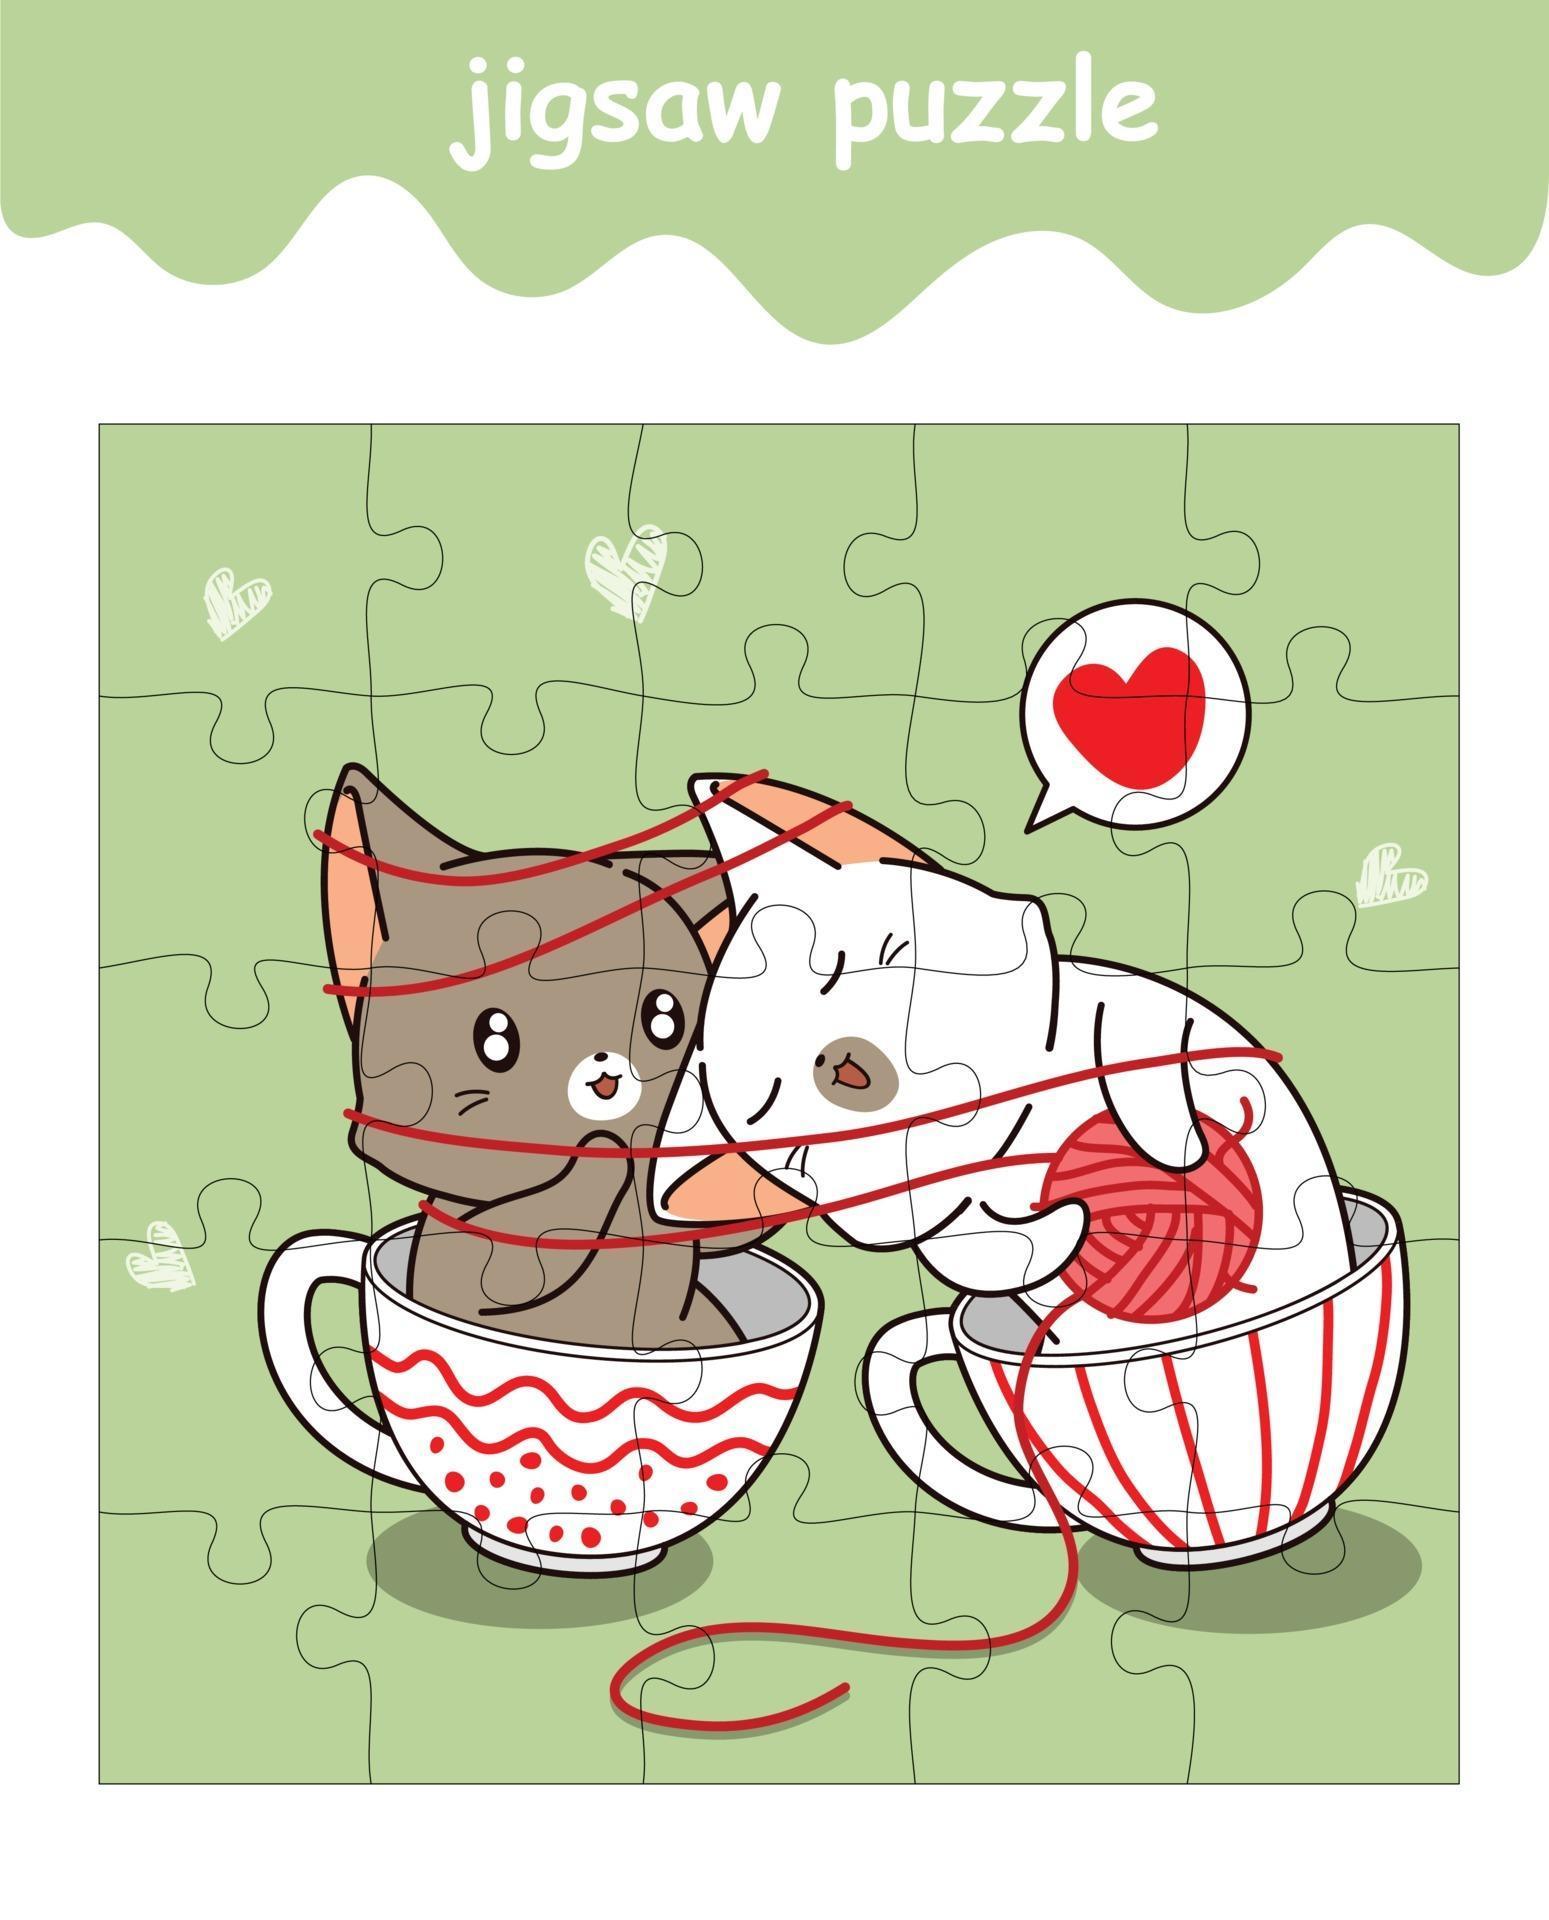 jigsaw puzzle game of adorable couple cat cat cartoon